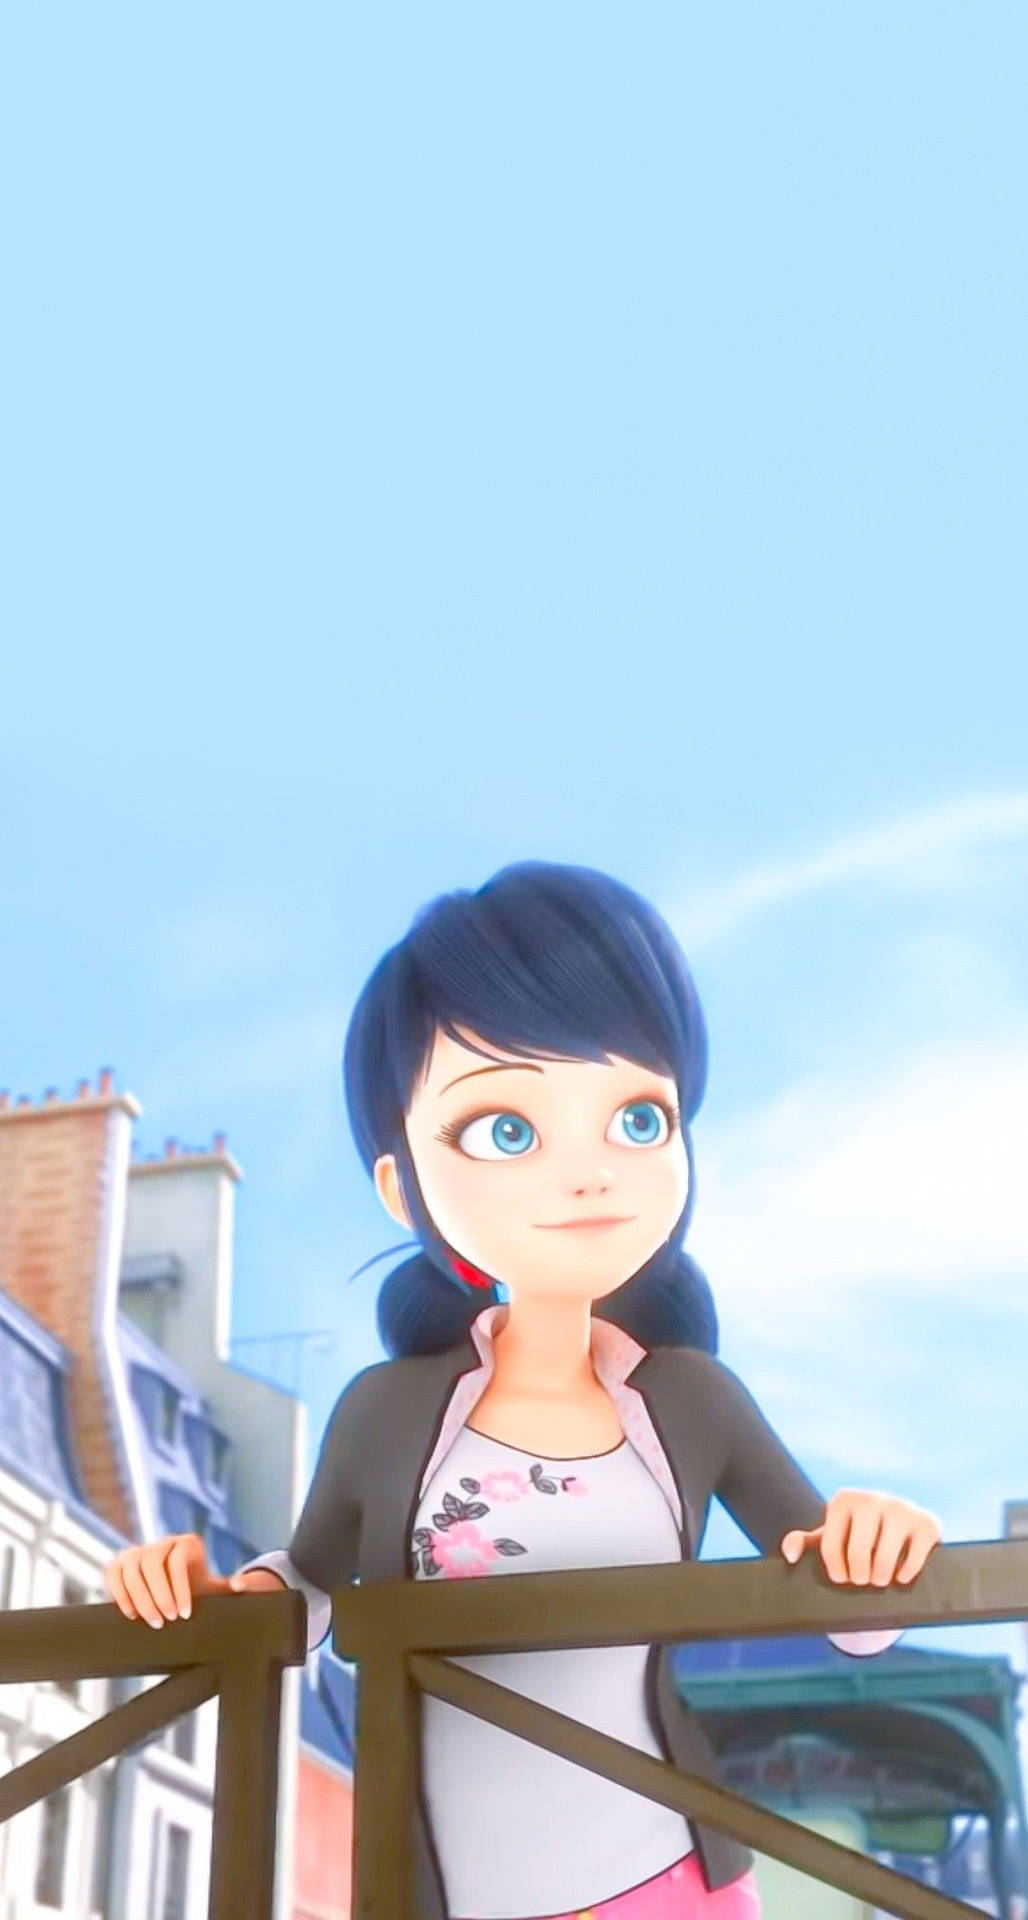 Marinette Looking At The Distance